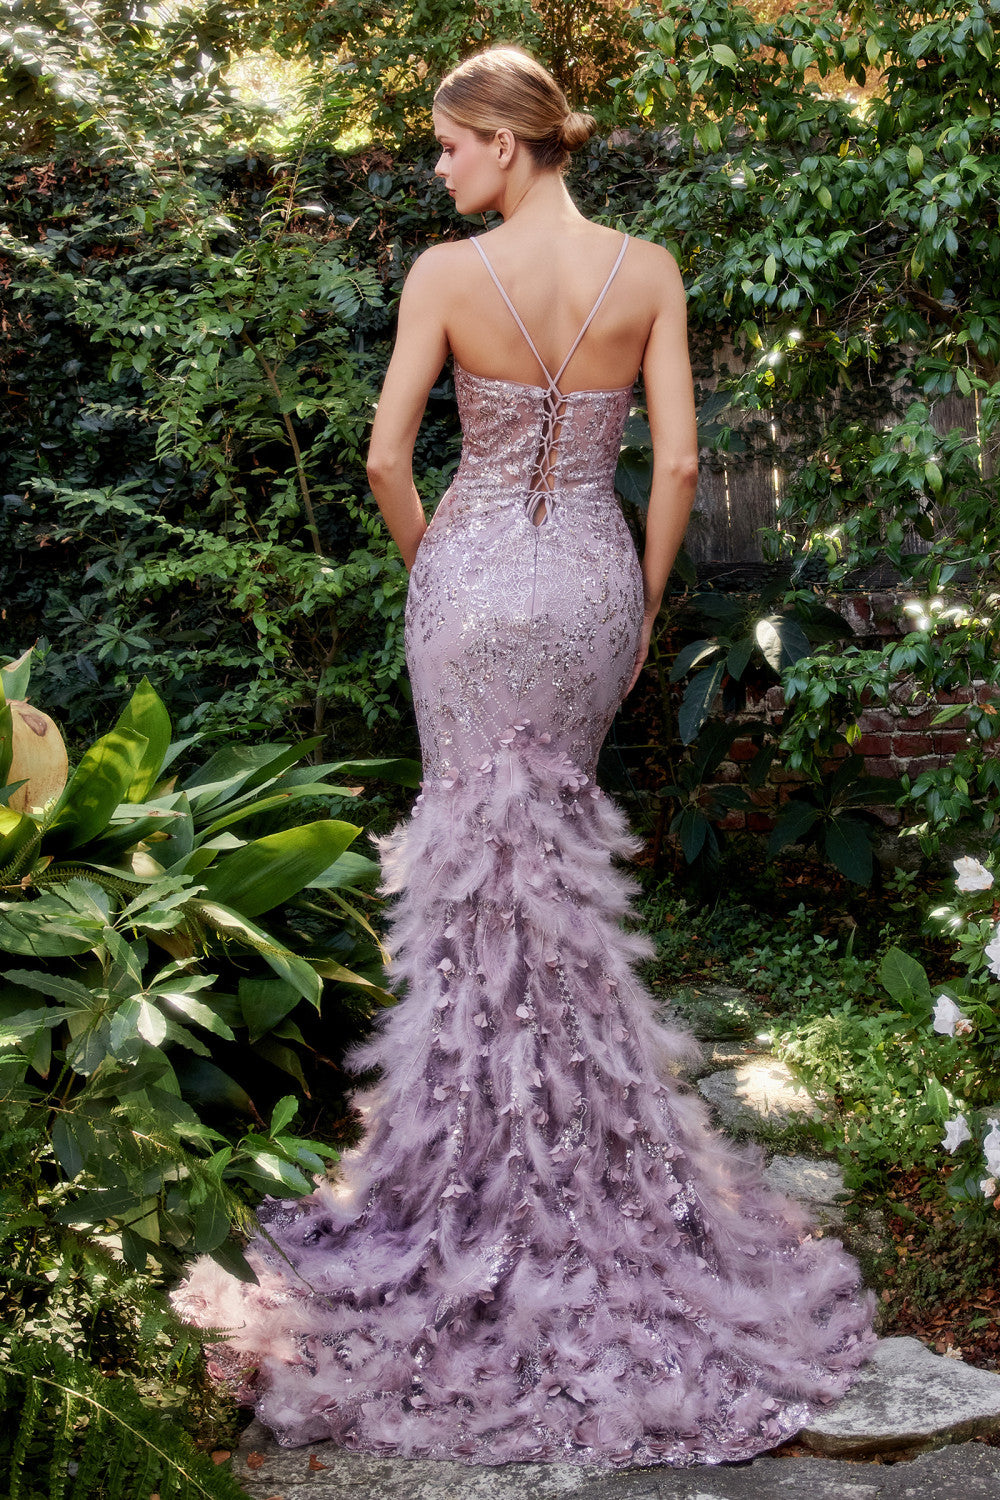 Andrea & Leo A1116 Dress - Floral Beaded Lattice Print Mermaid Gown with Lace-Up Corset, Feathered Lace Train, and Floral Appliques. Perfect for Prom, Pageant, and Red Carpet Events.  Dress in Mauve.